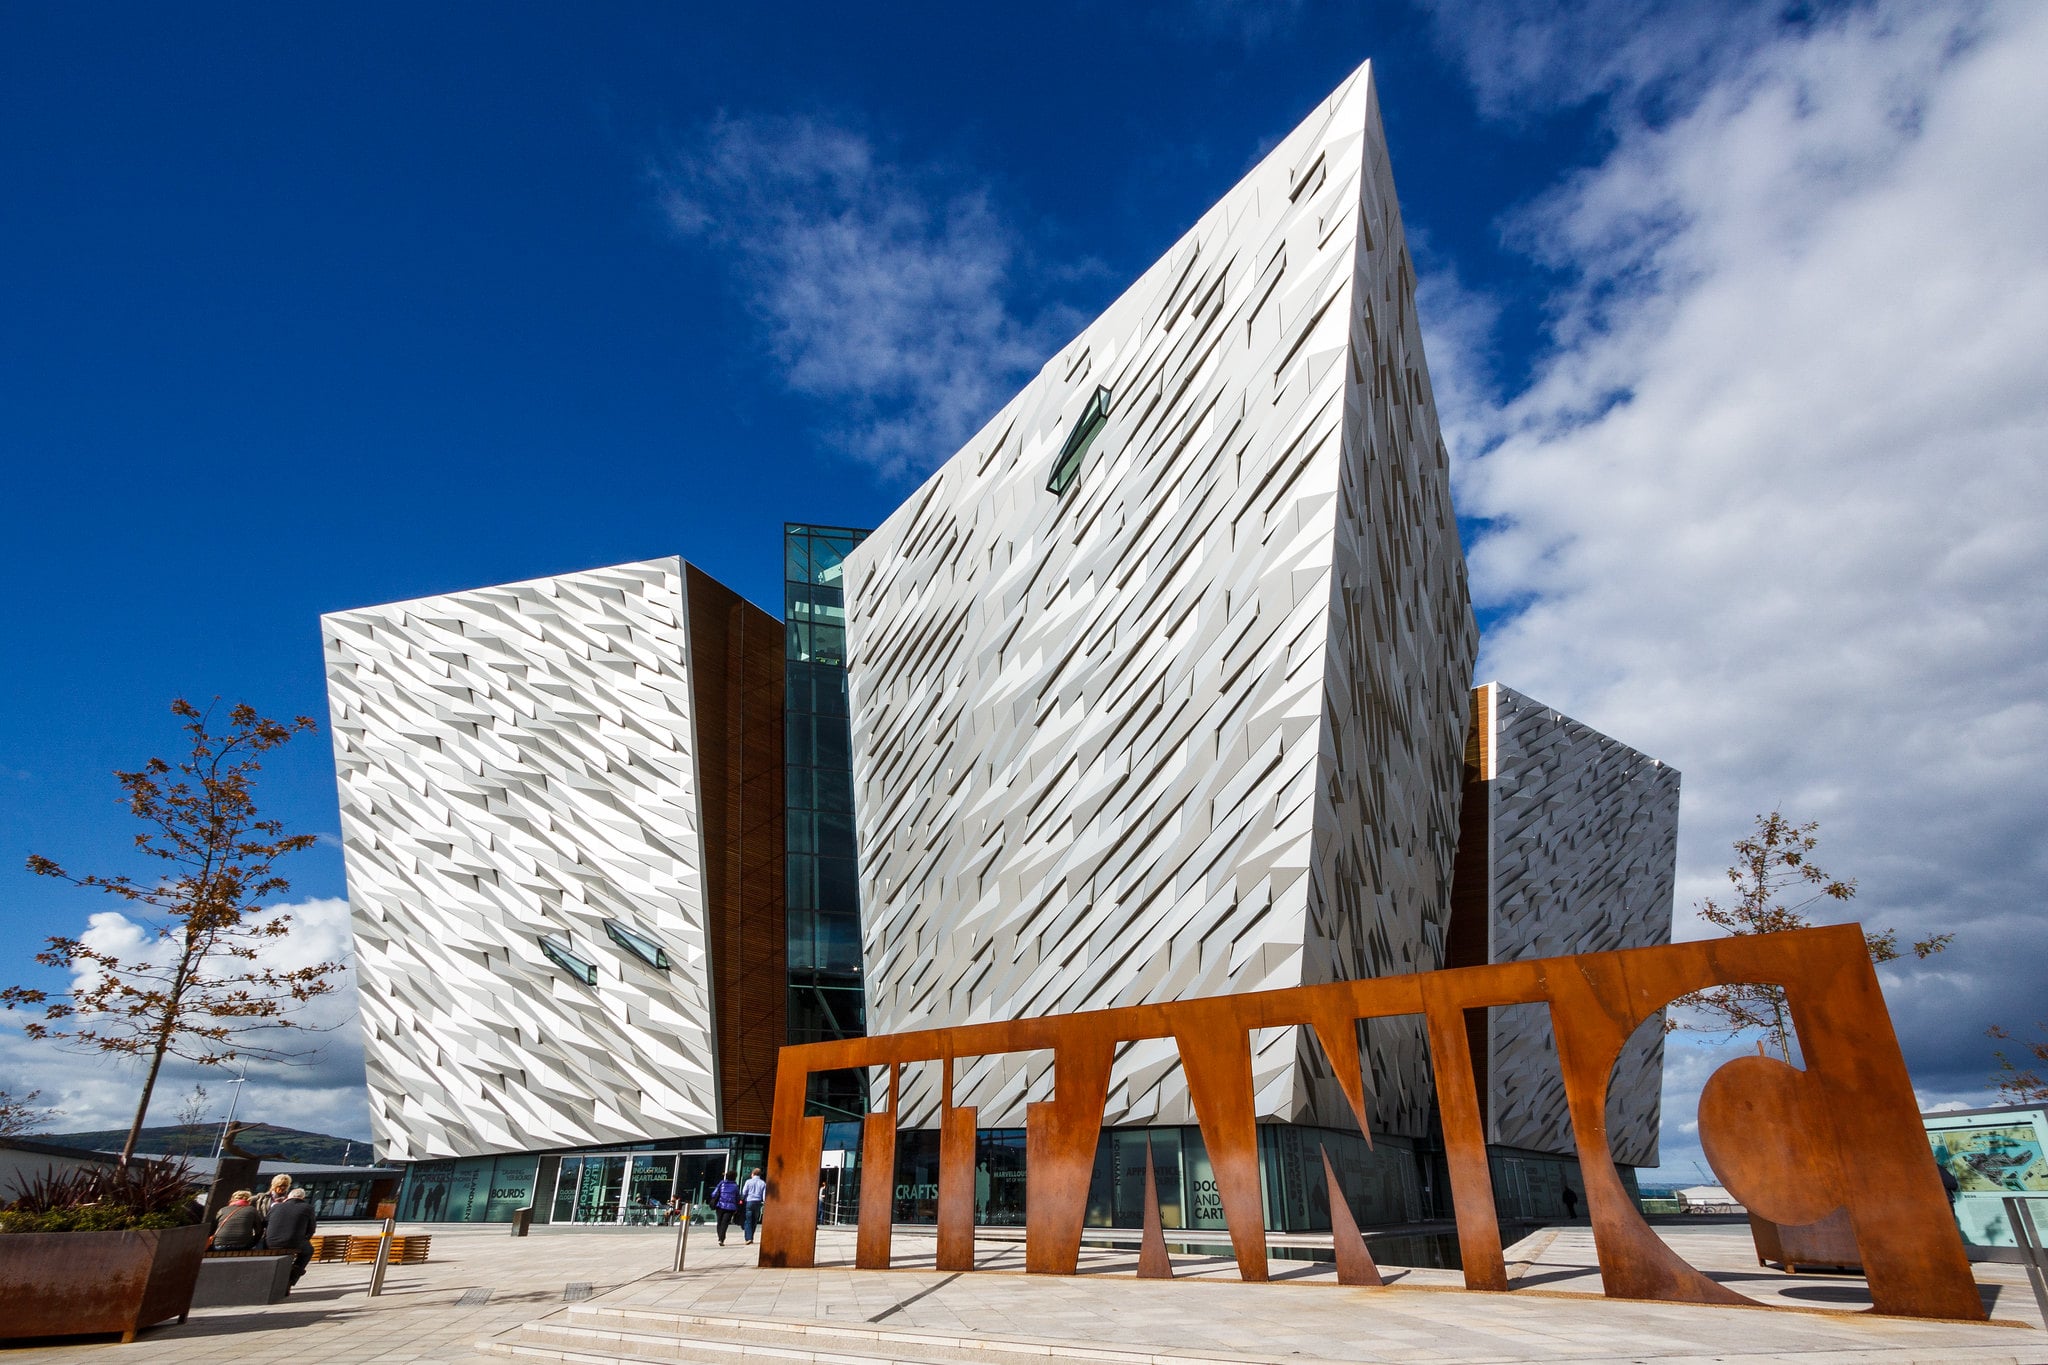 Seeing the Titanic Belfast museum is an awesome thing to do in Belfast Ireland